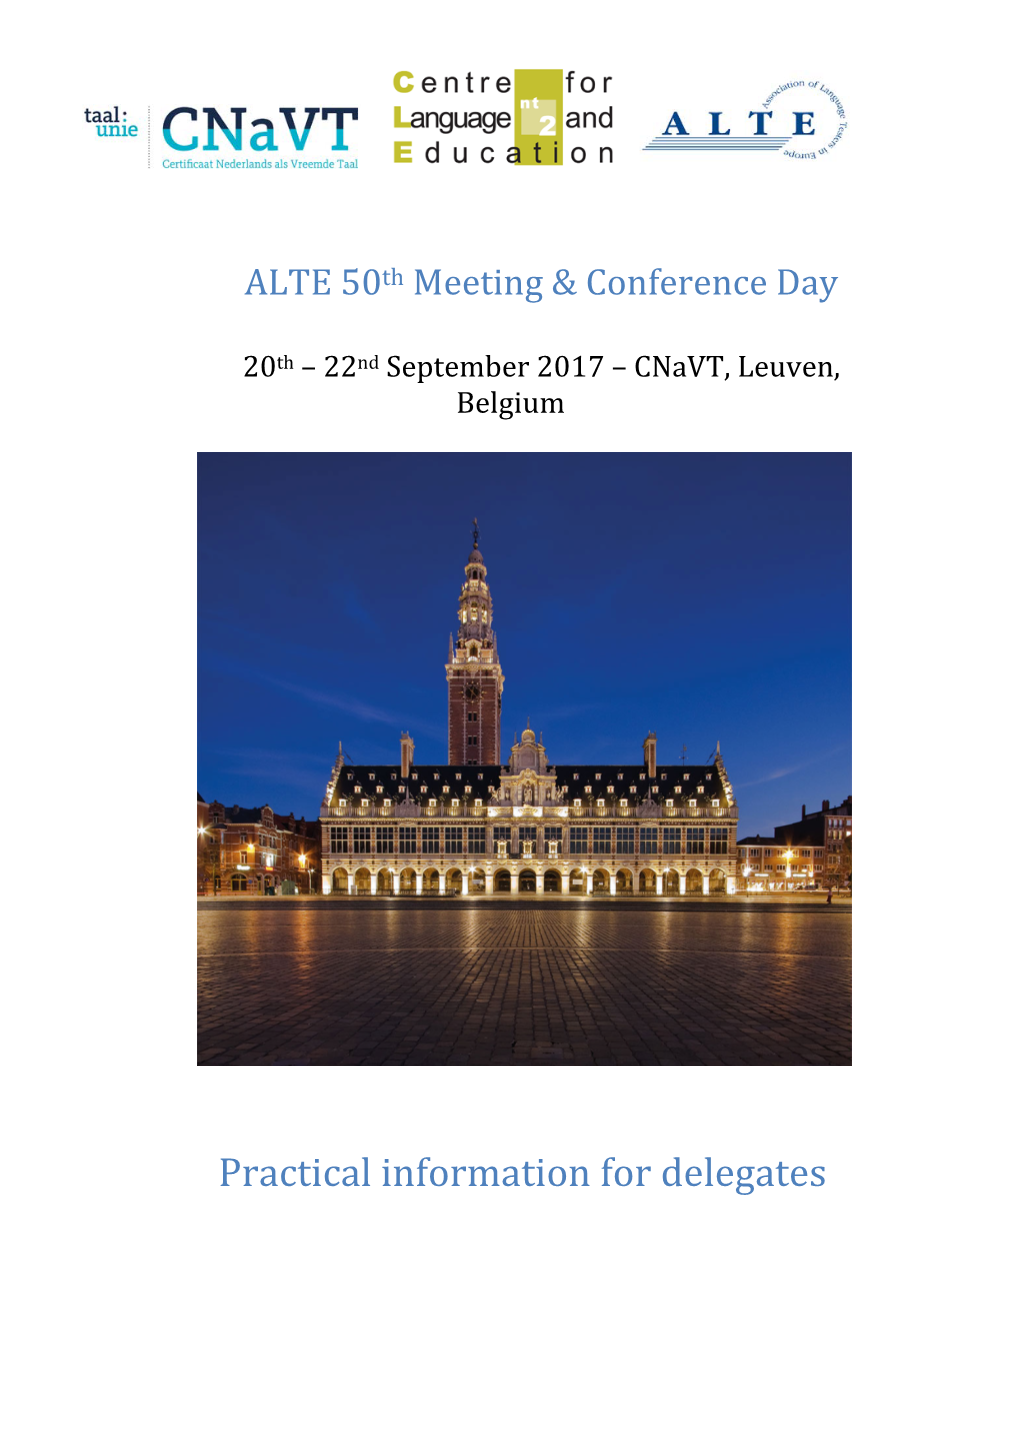 Practical Information for Delegates Welcome to Leuven!